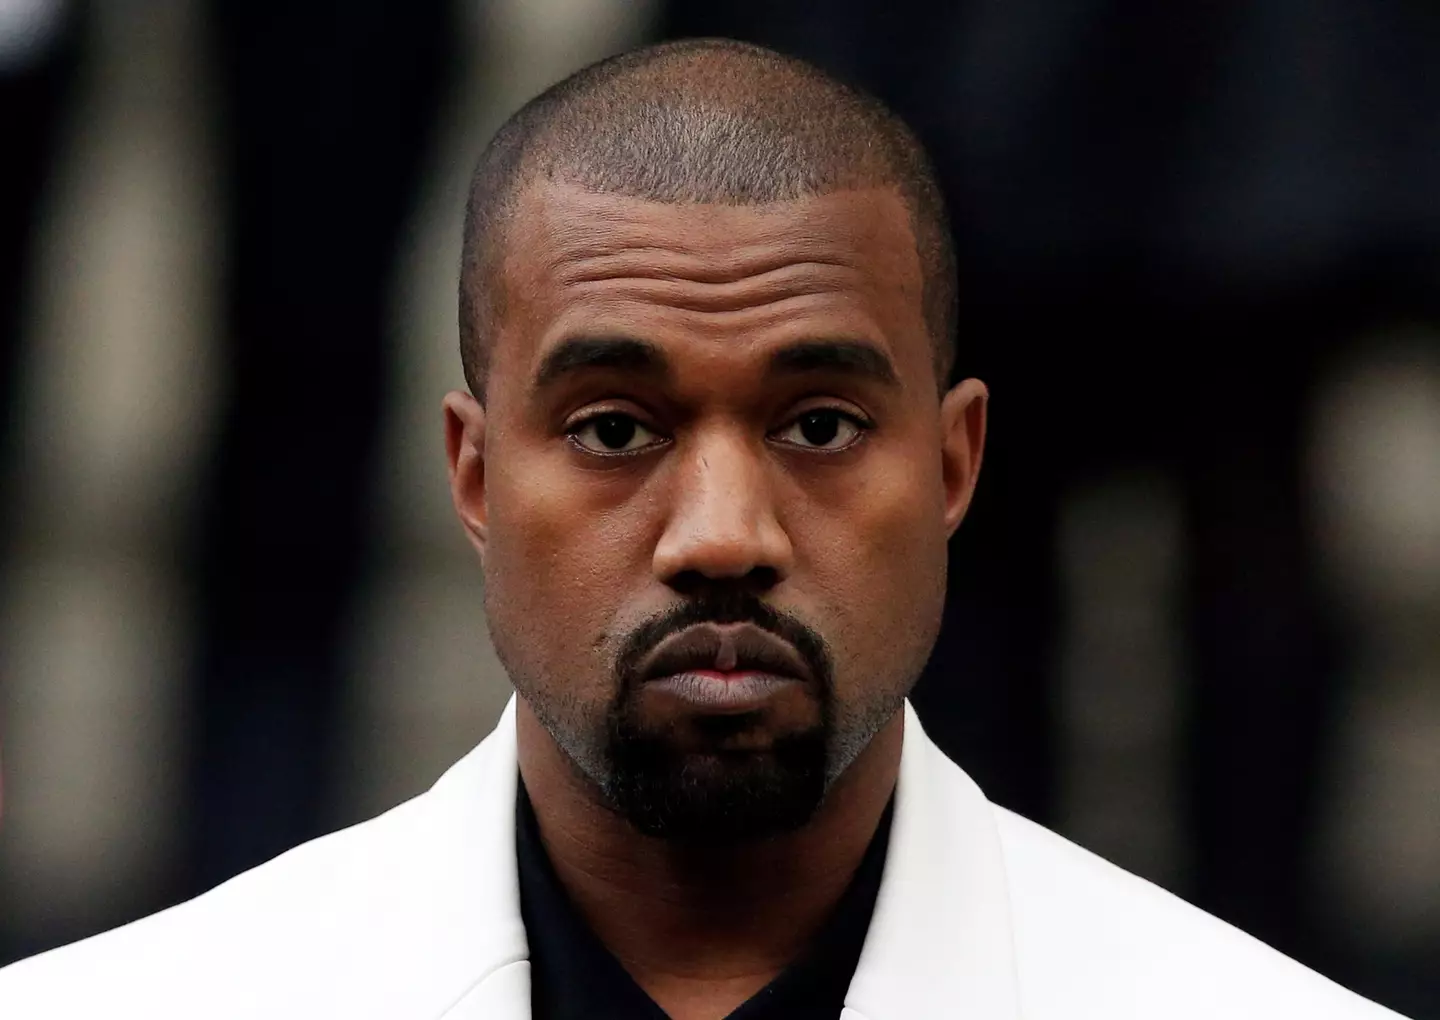 Kanye West is being shunned after making anti-semitic comments.